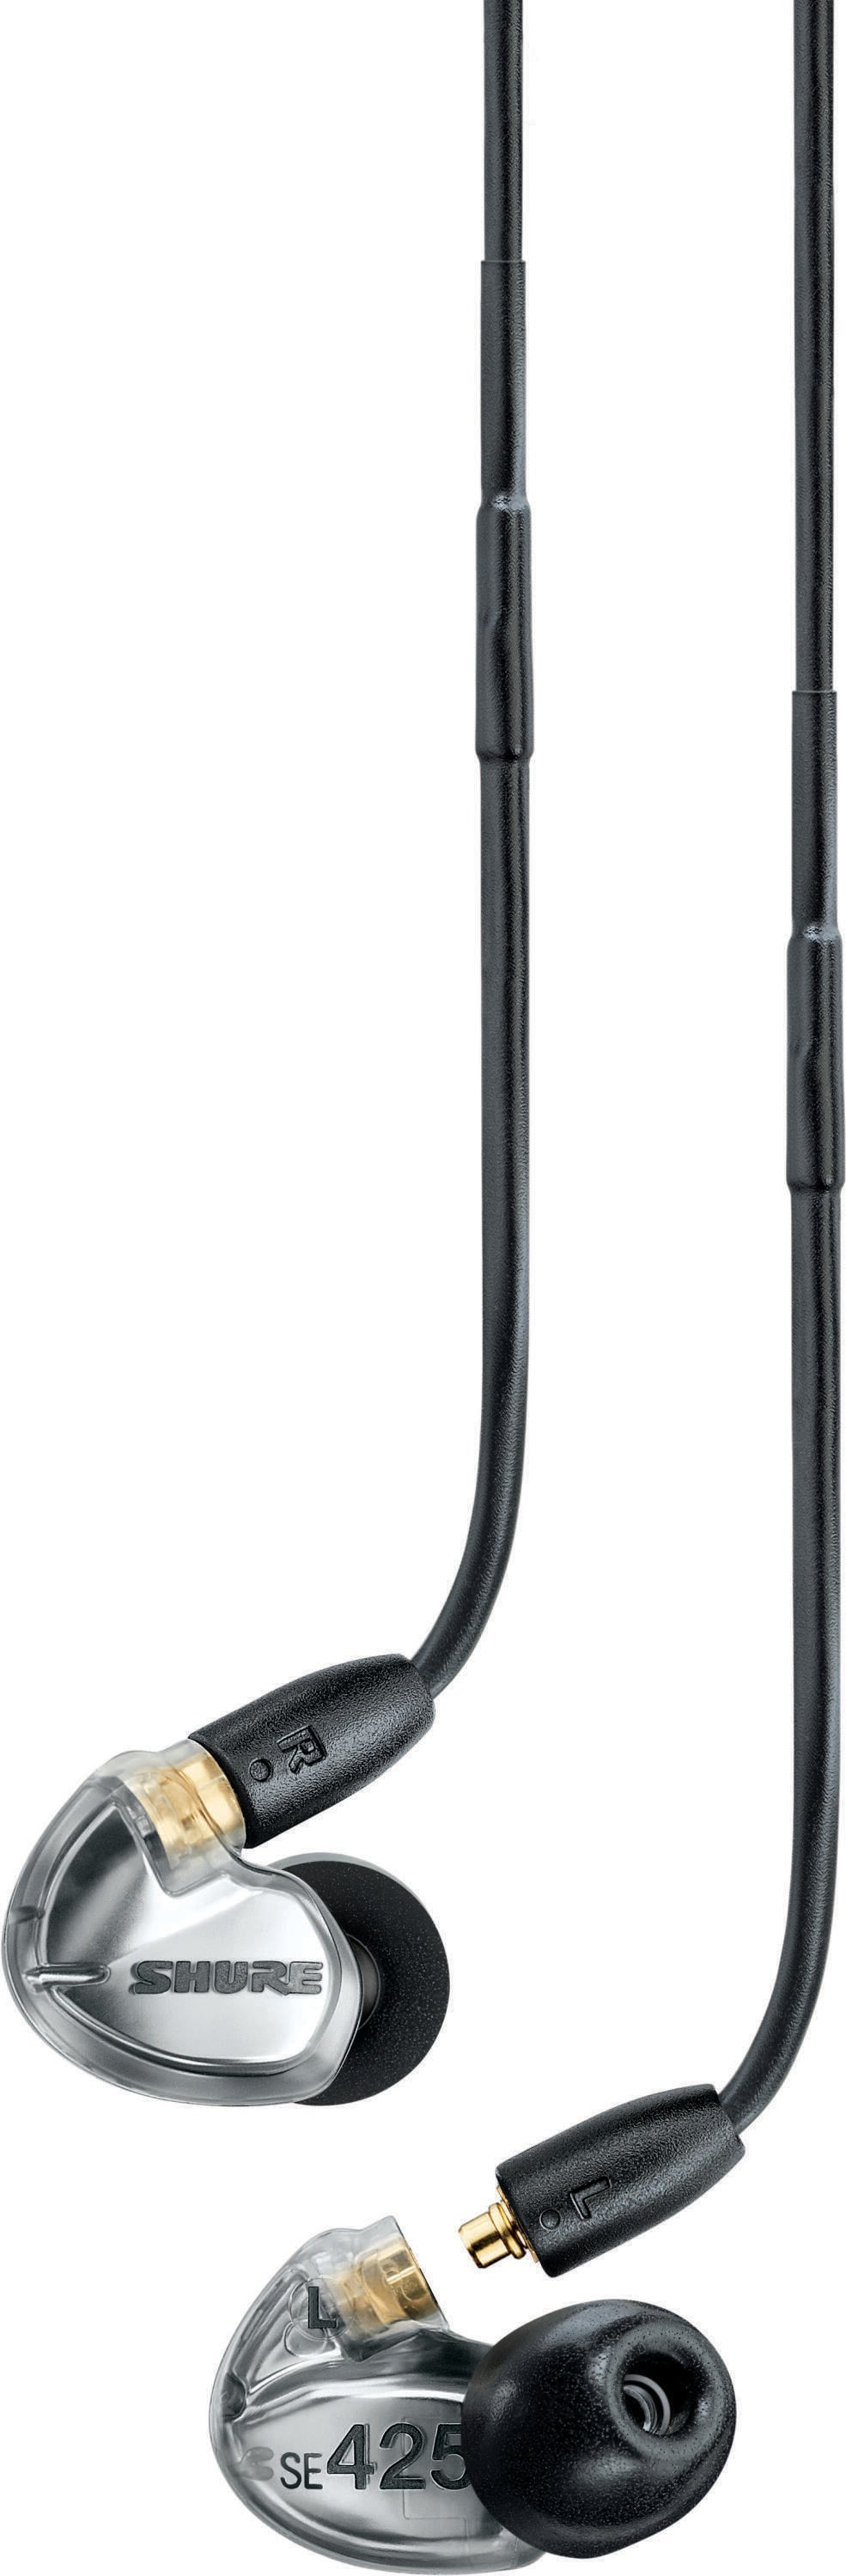 Shure SE425 Sound-isolating Earphones with 3.5mm Comm Cable +